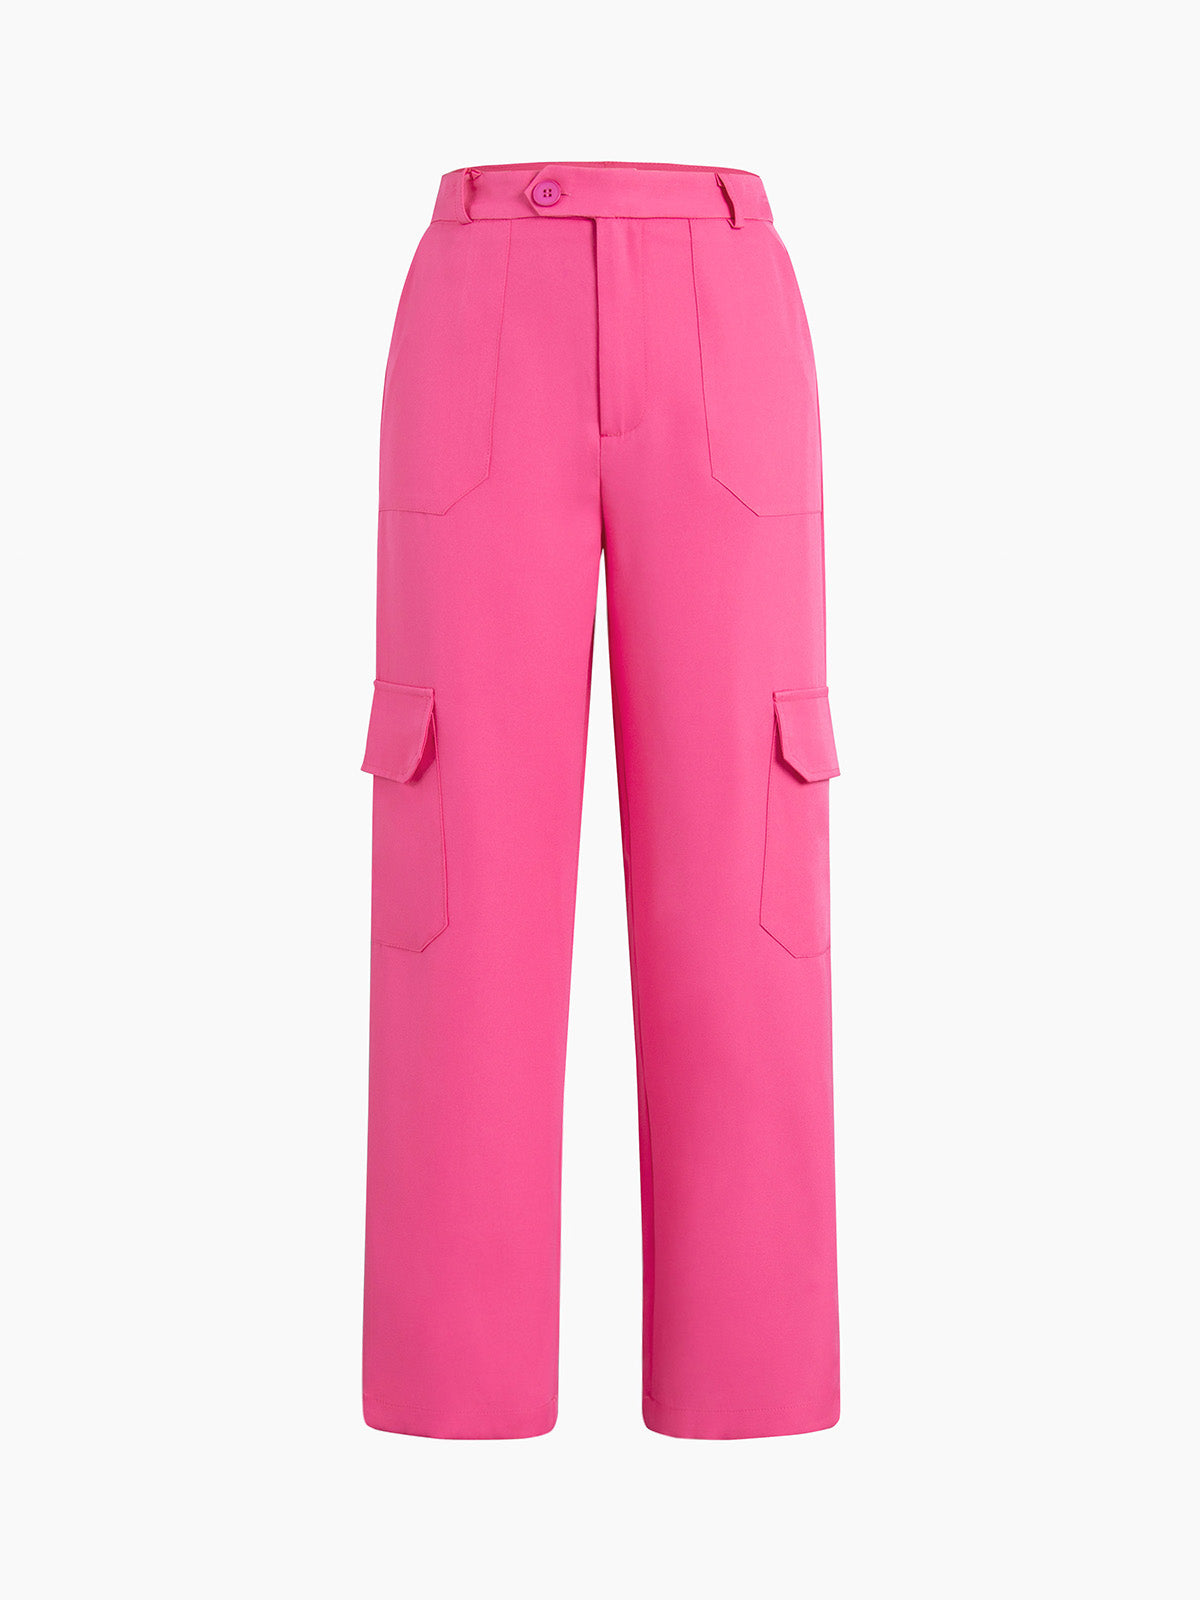 Buttoned Pockets Ankle Straight Leg Pants